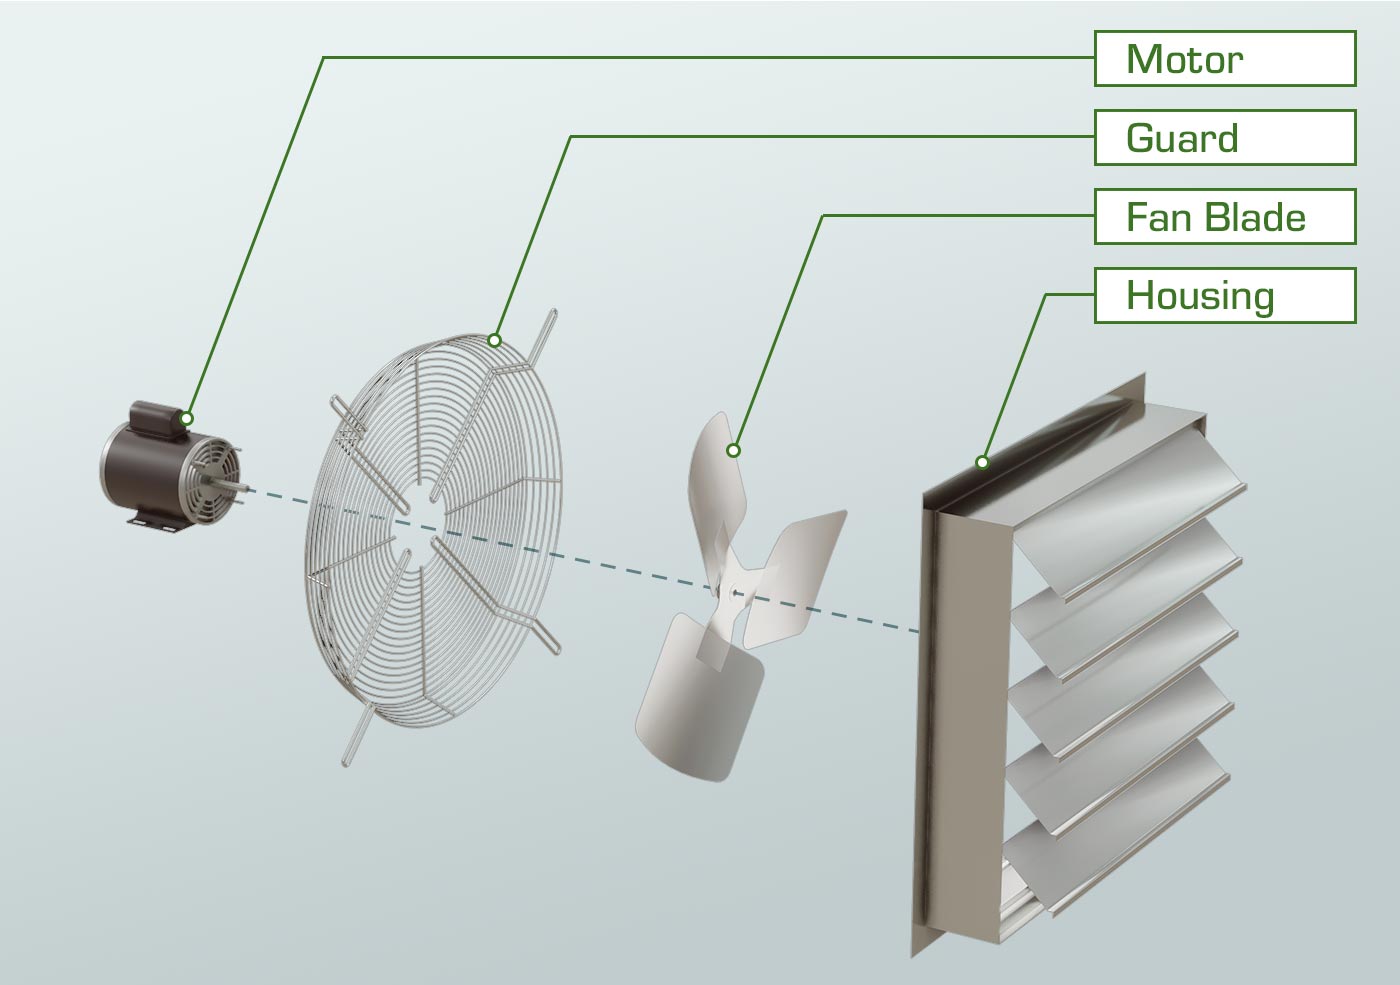 Exploded view of an AX fan with motor, guard, fan blade and housing.